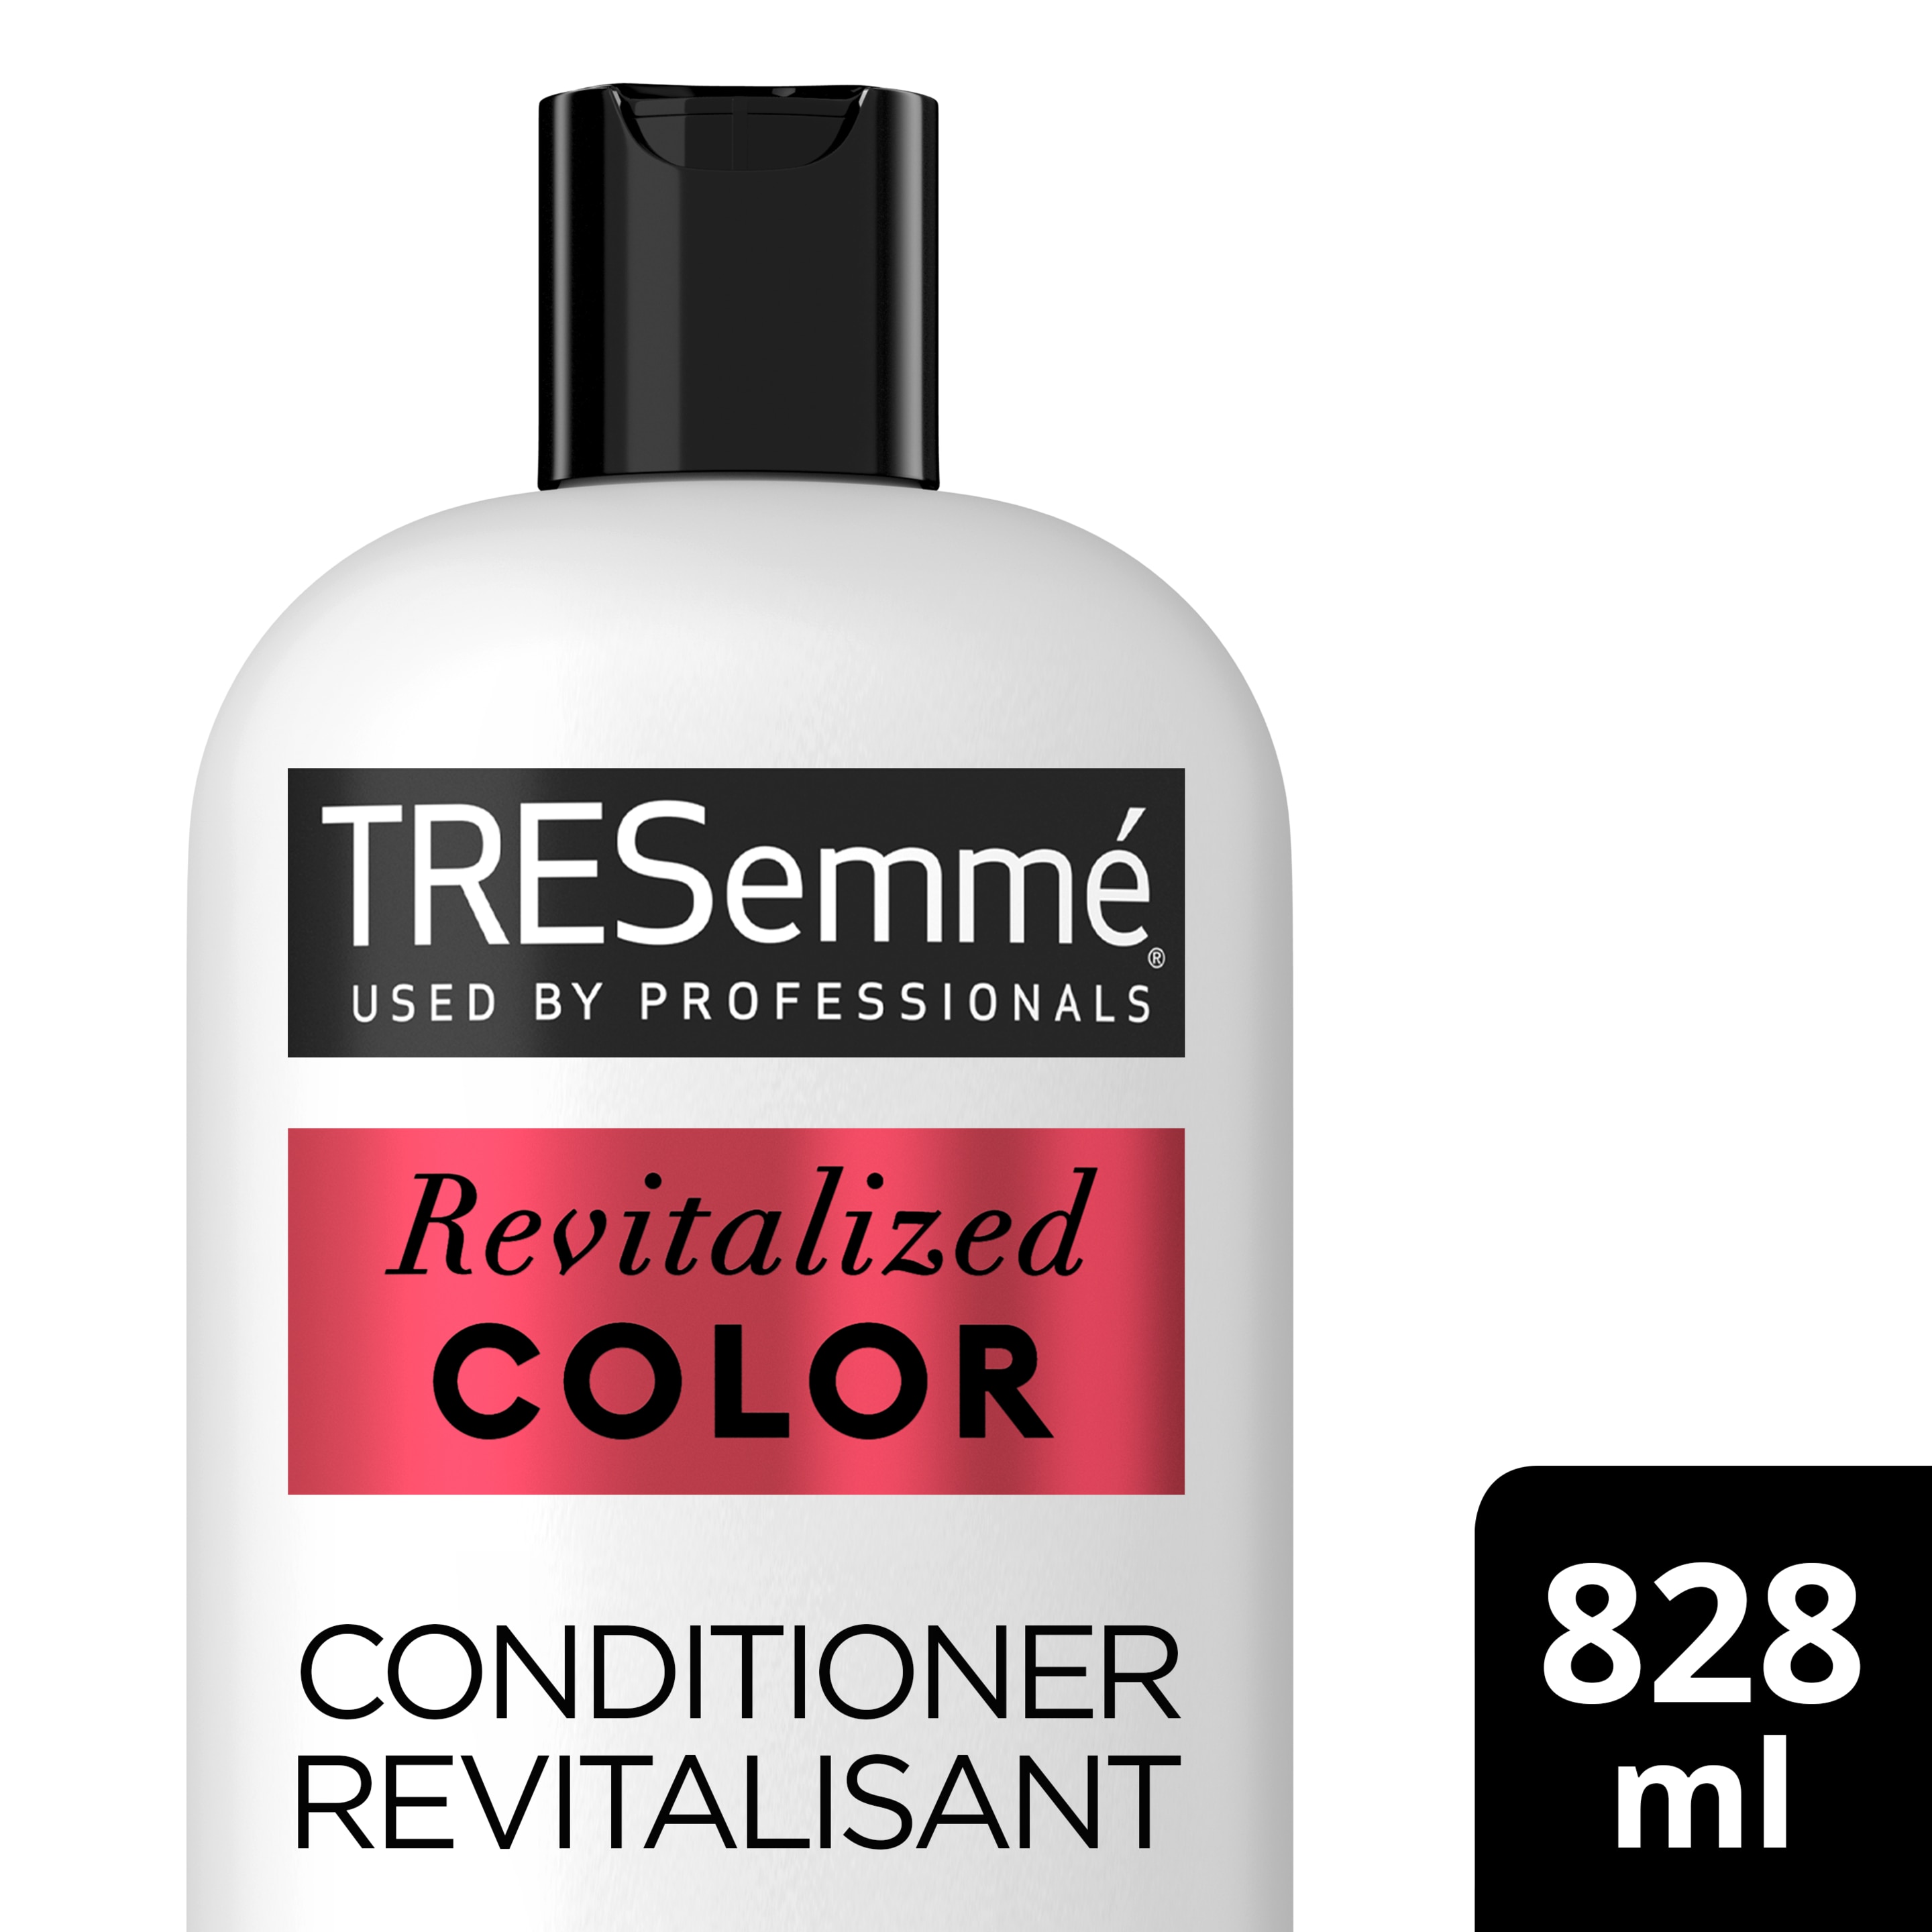 Revitalize Color Conditioner for Colored Hair